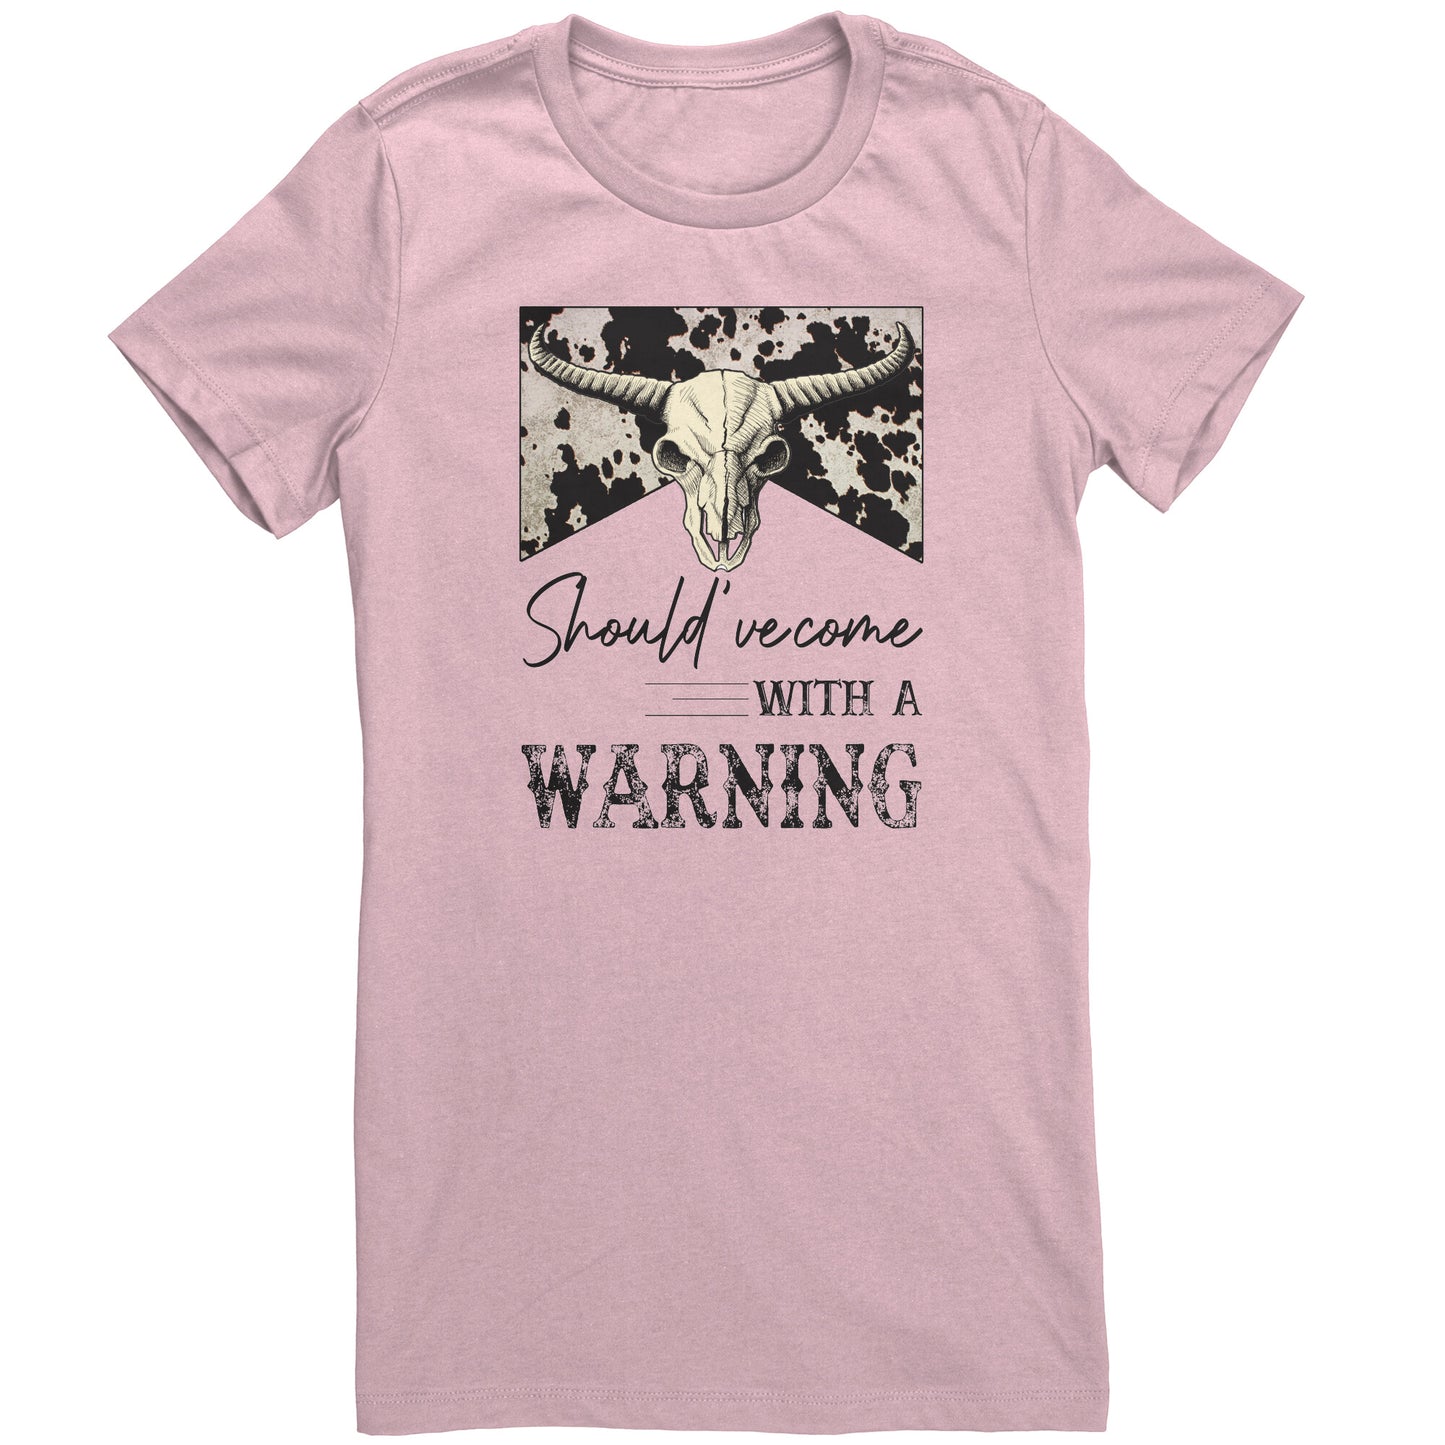 Should've Came With A Warning Slim Fit T-Shirt